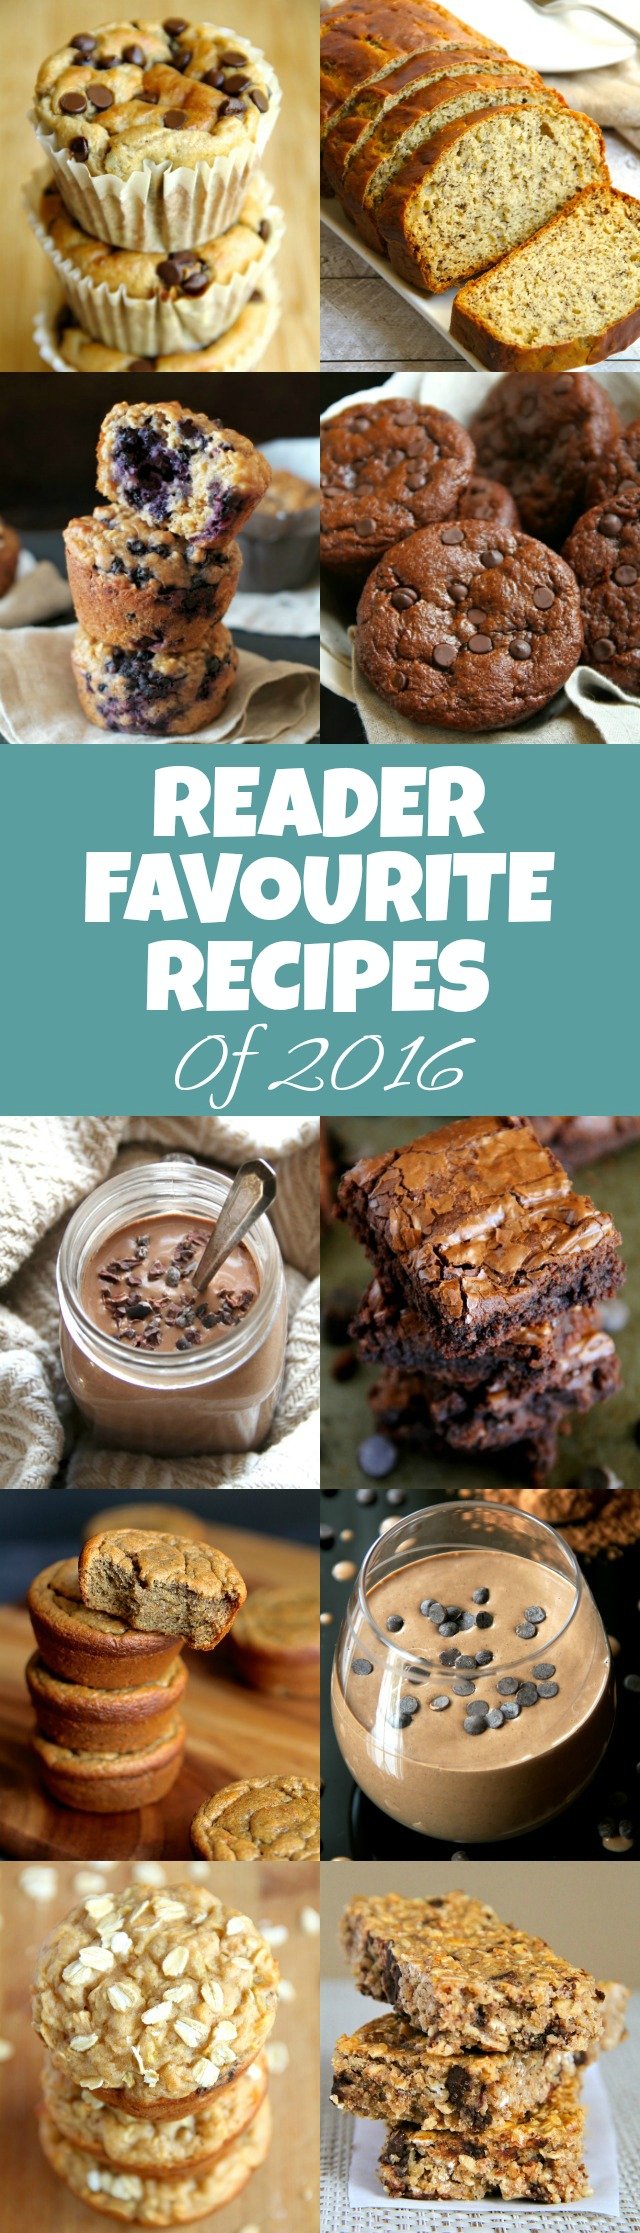 Top 10 Reader Favourite Recipes of 2016! - a collection of healthy desserts and snacks to incorporate into your diet in the new year! | runningwithspoons.com